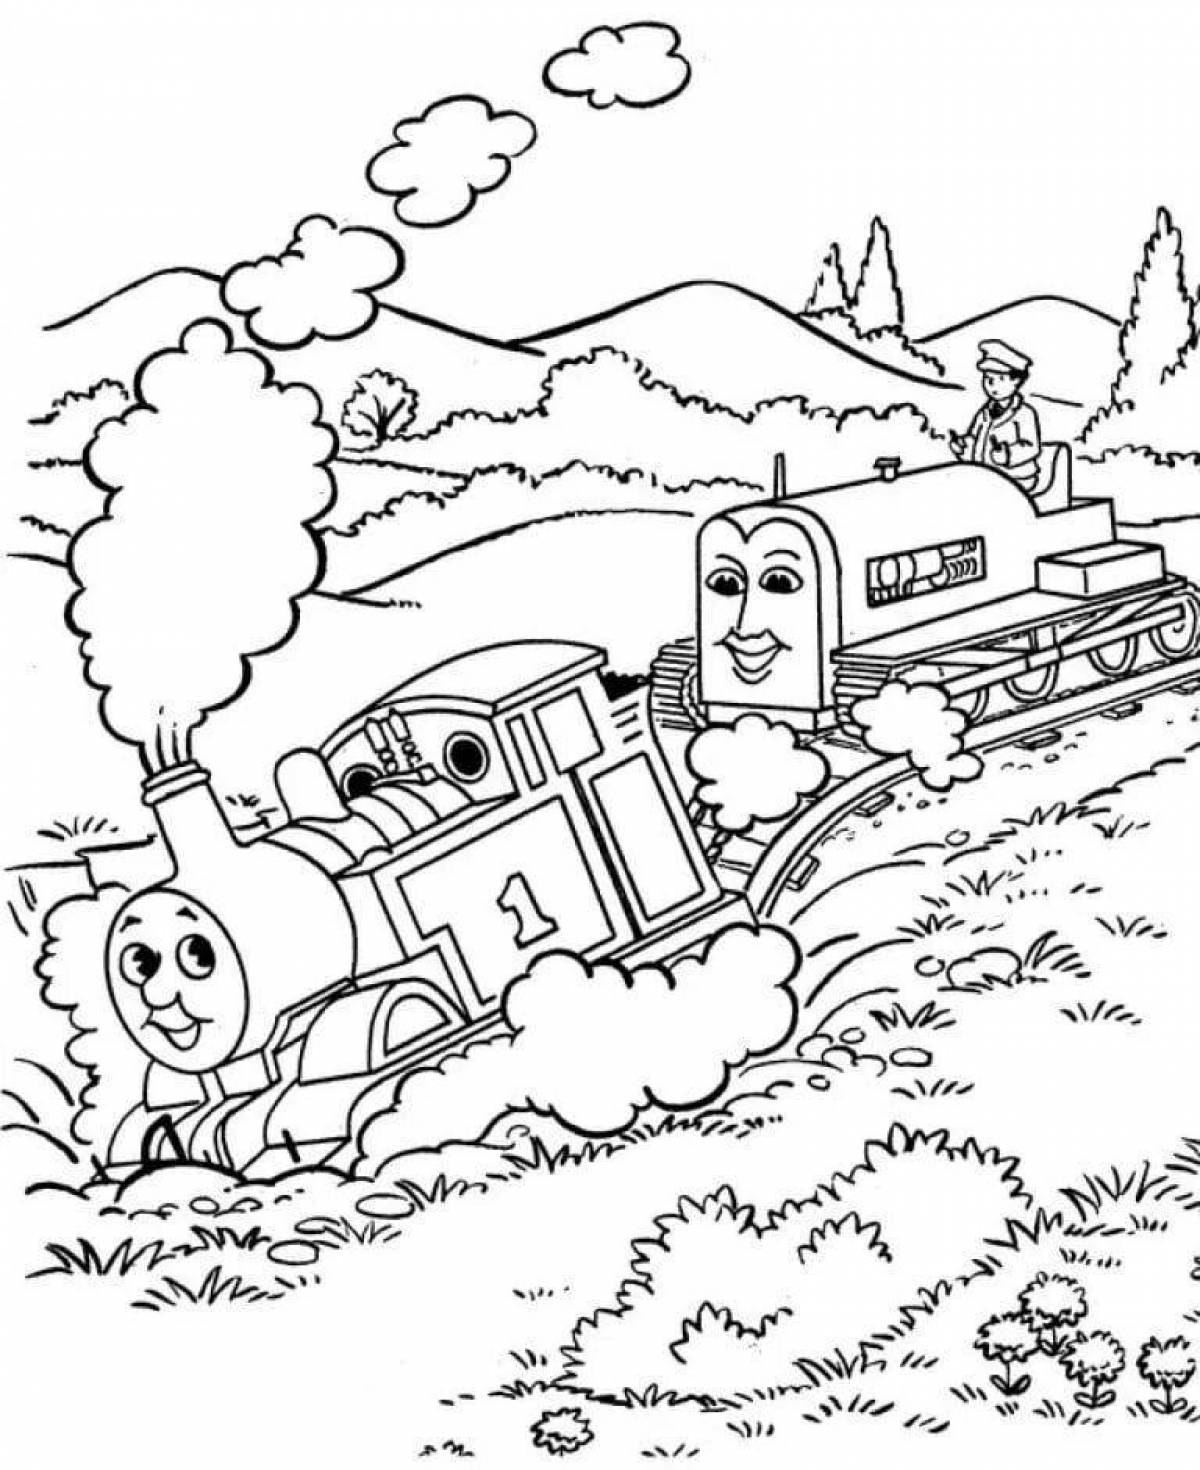 Colorful thomas train coloring page